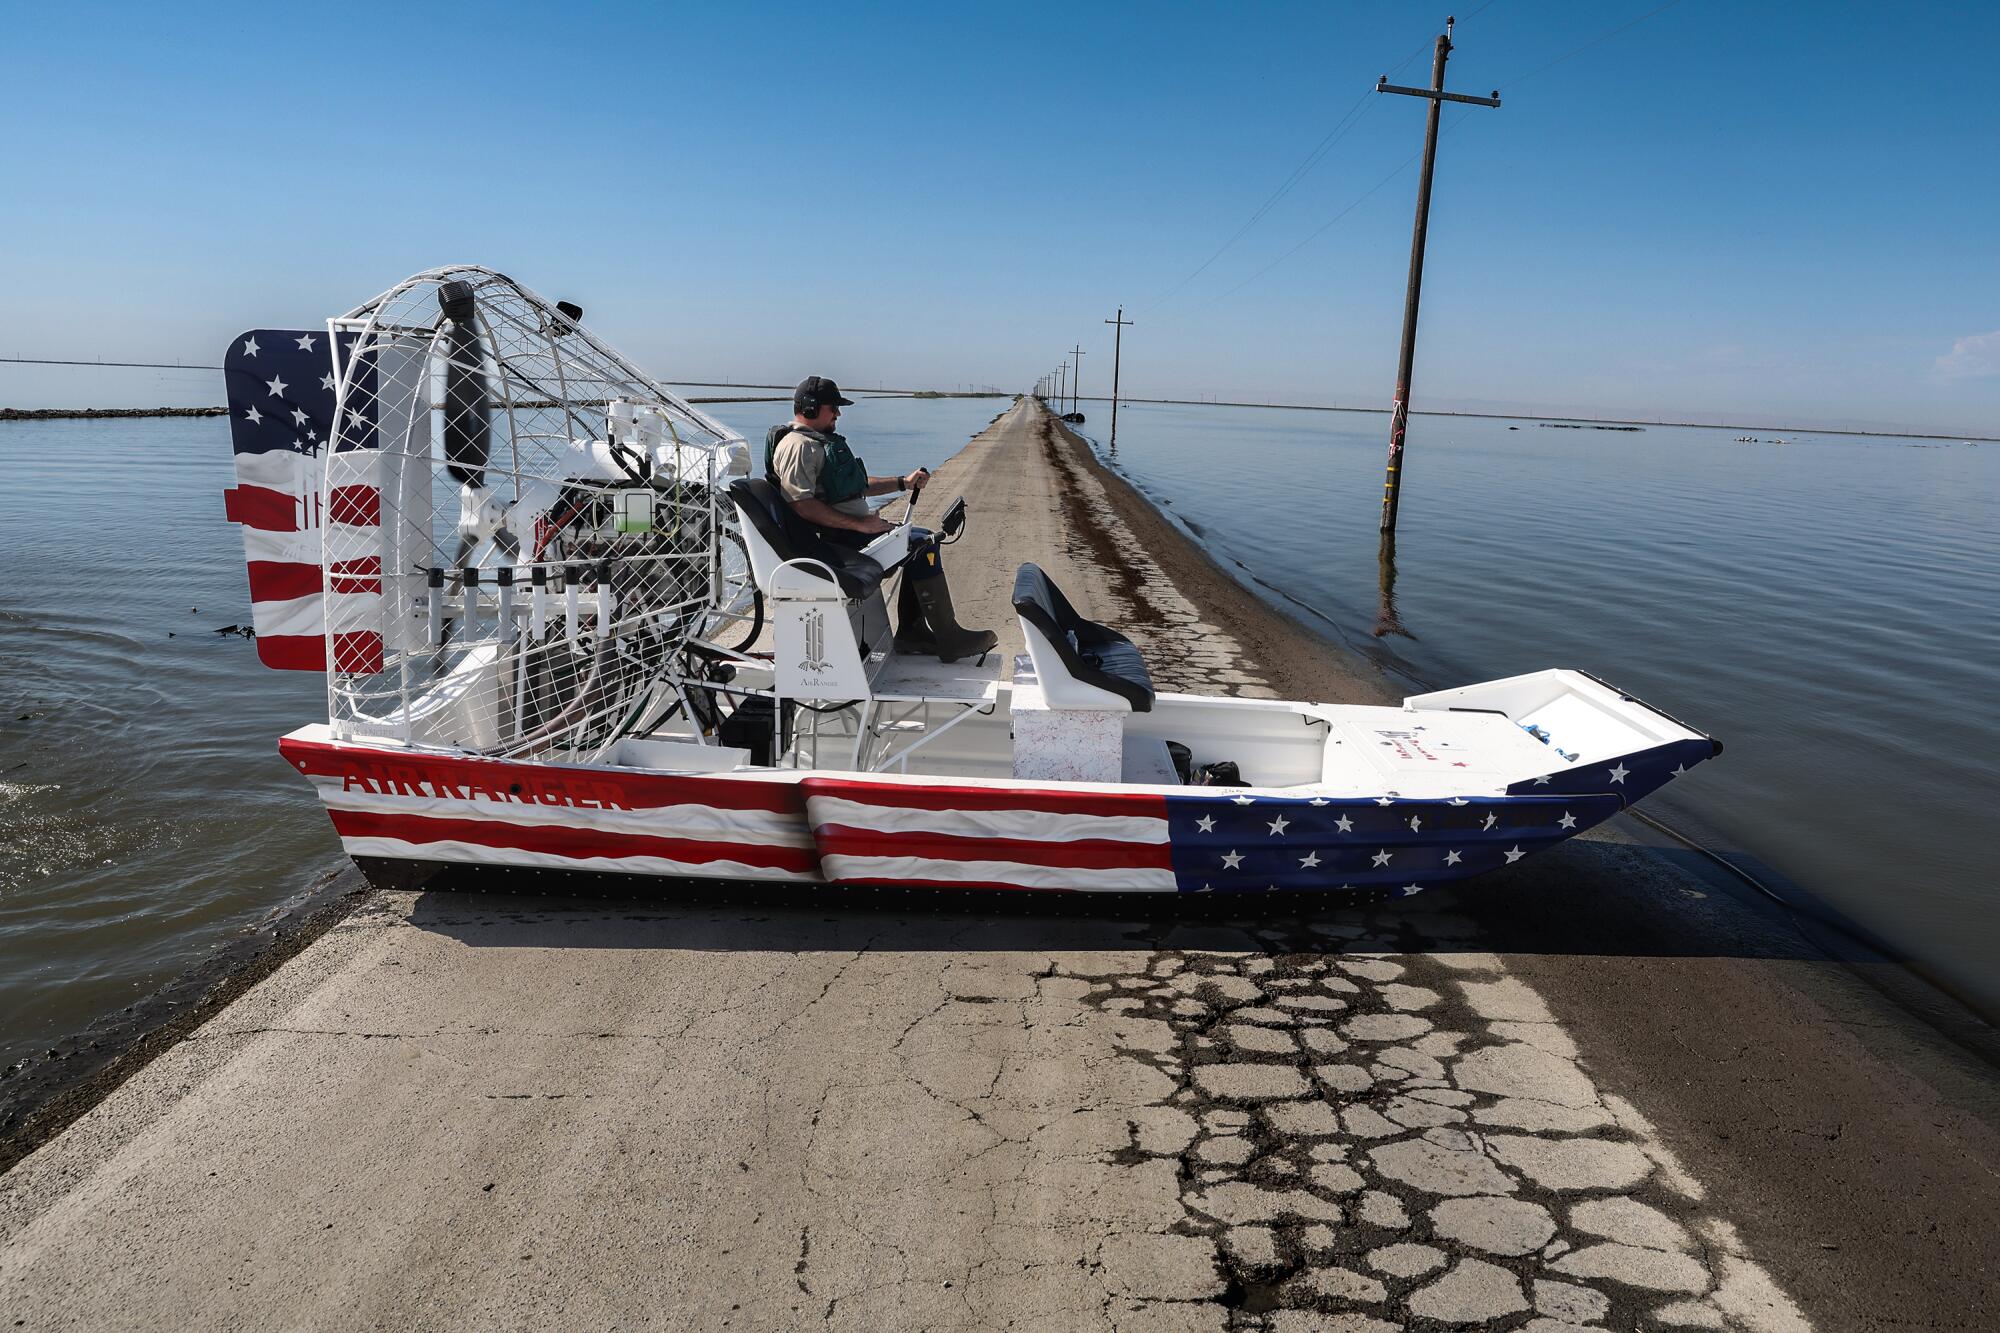 Sheriff's deputies tour Tulare Lake in a red, white and blue airboat.